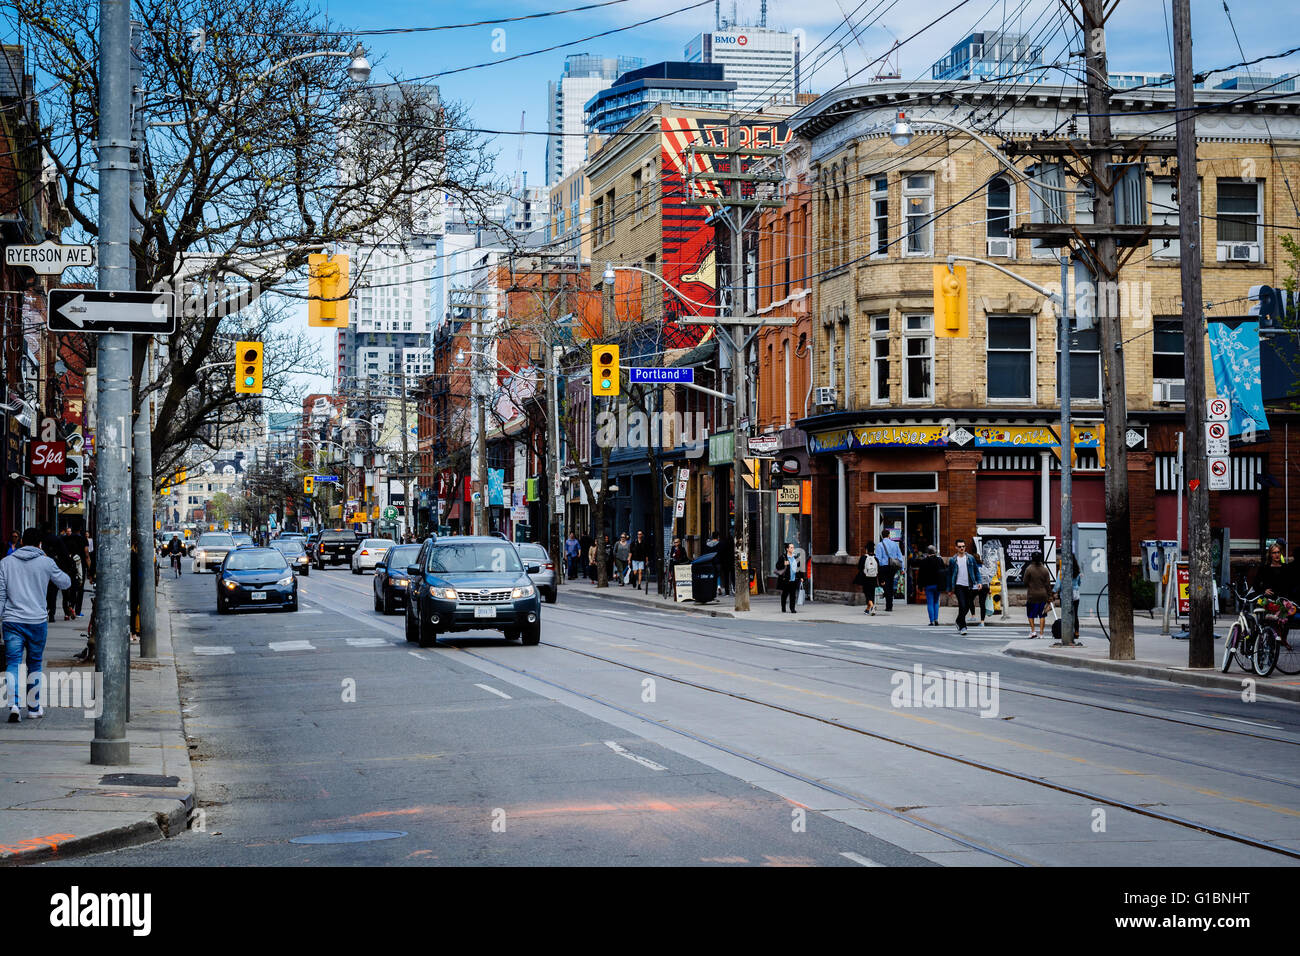 Queen Street West, in the Fashion District, of Toronto, Ontario